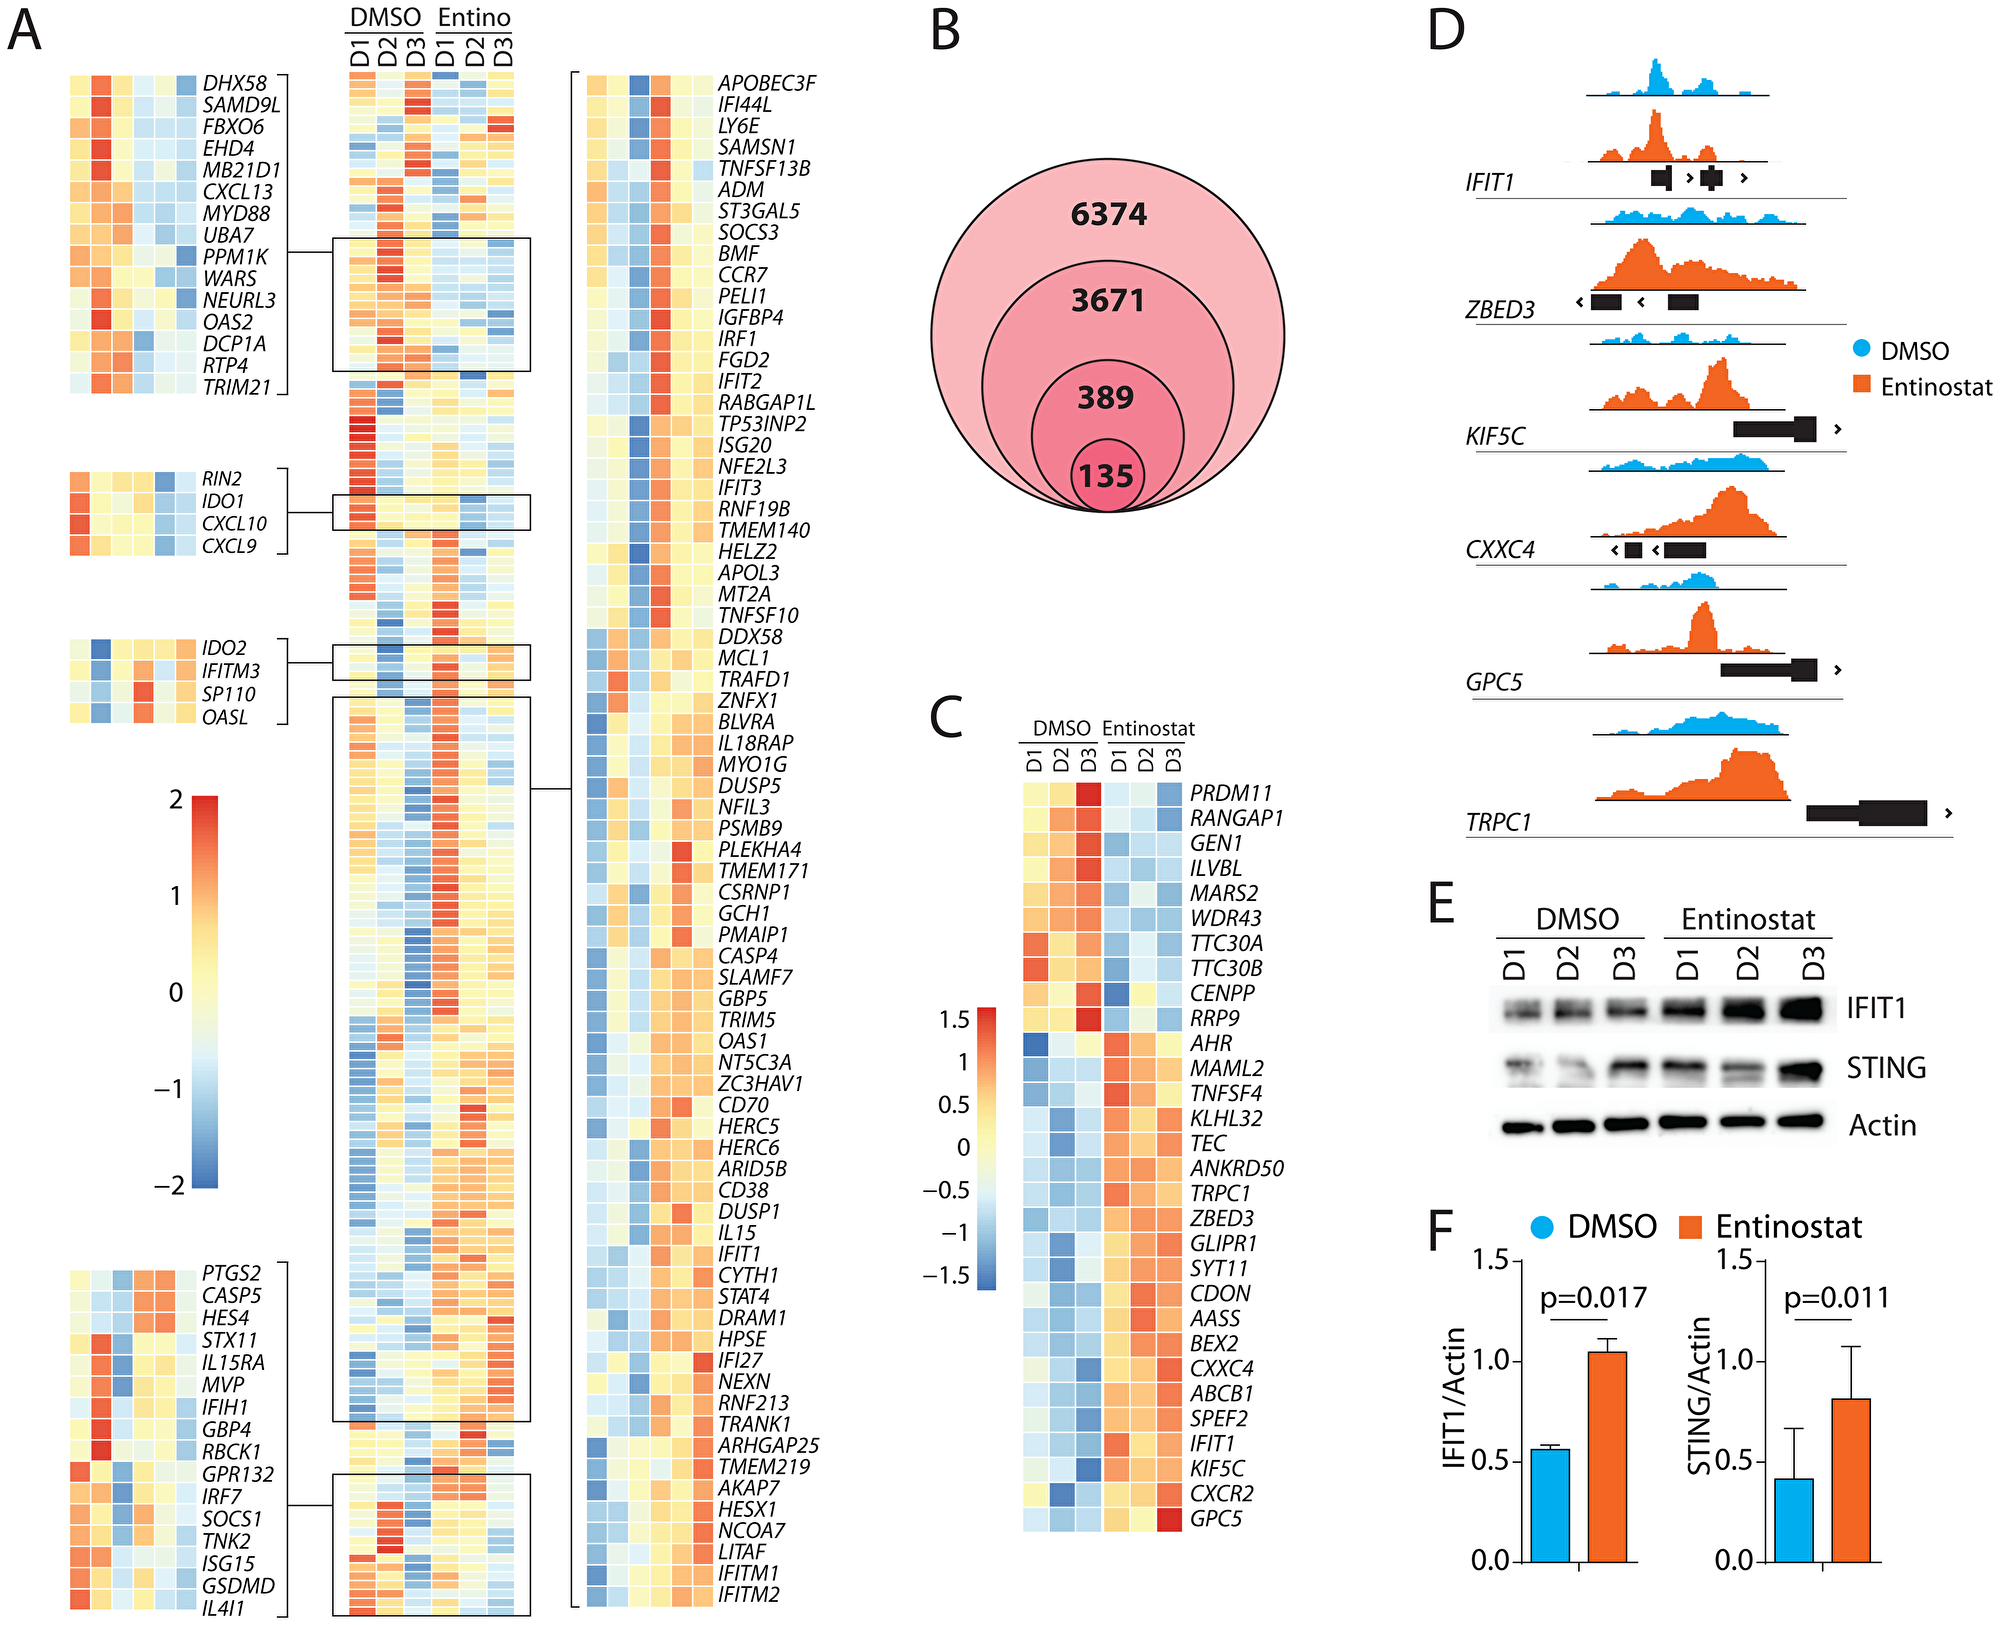 Transcriptomic alterations of IFIT1-associated genes and epigenetic upregulation of IFIT1 by entinostat.